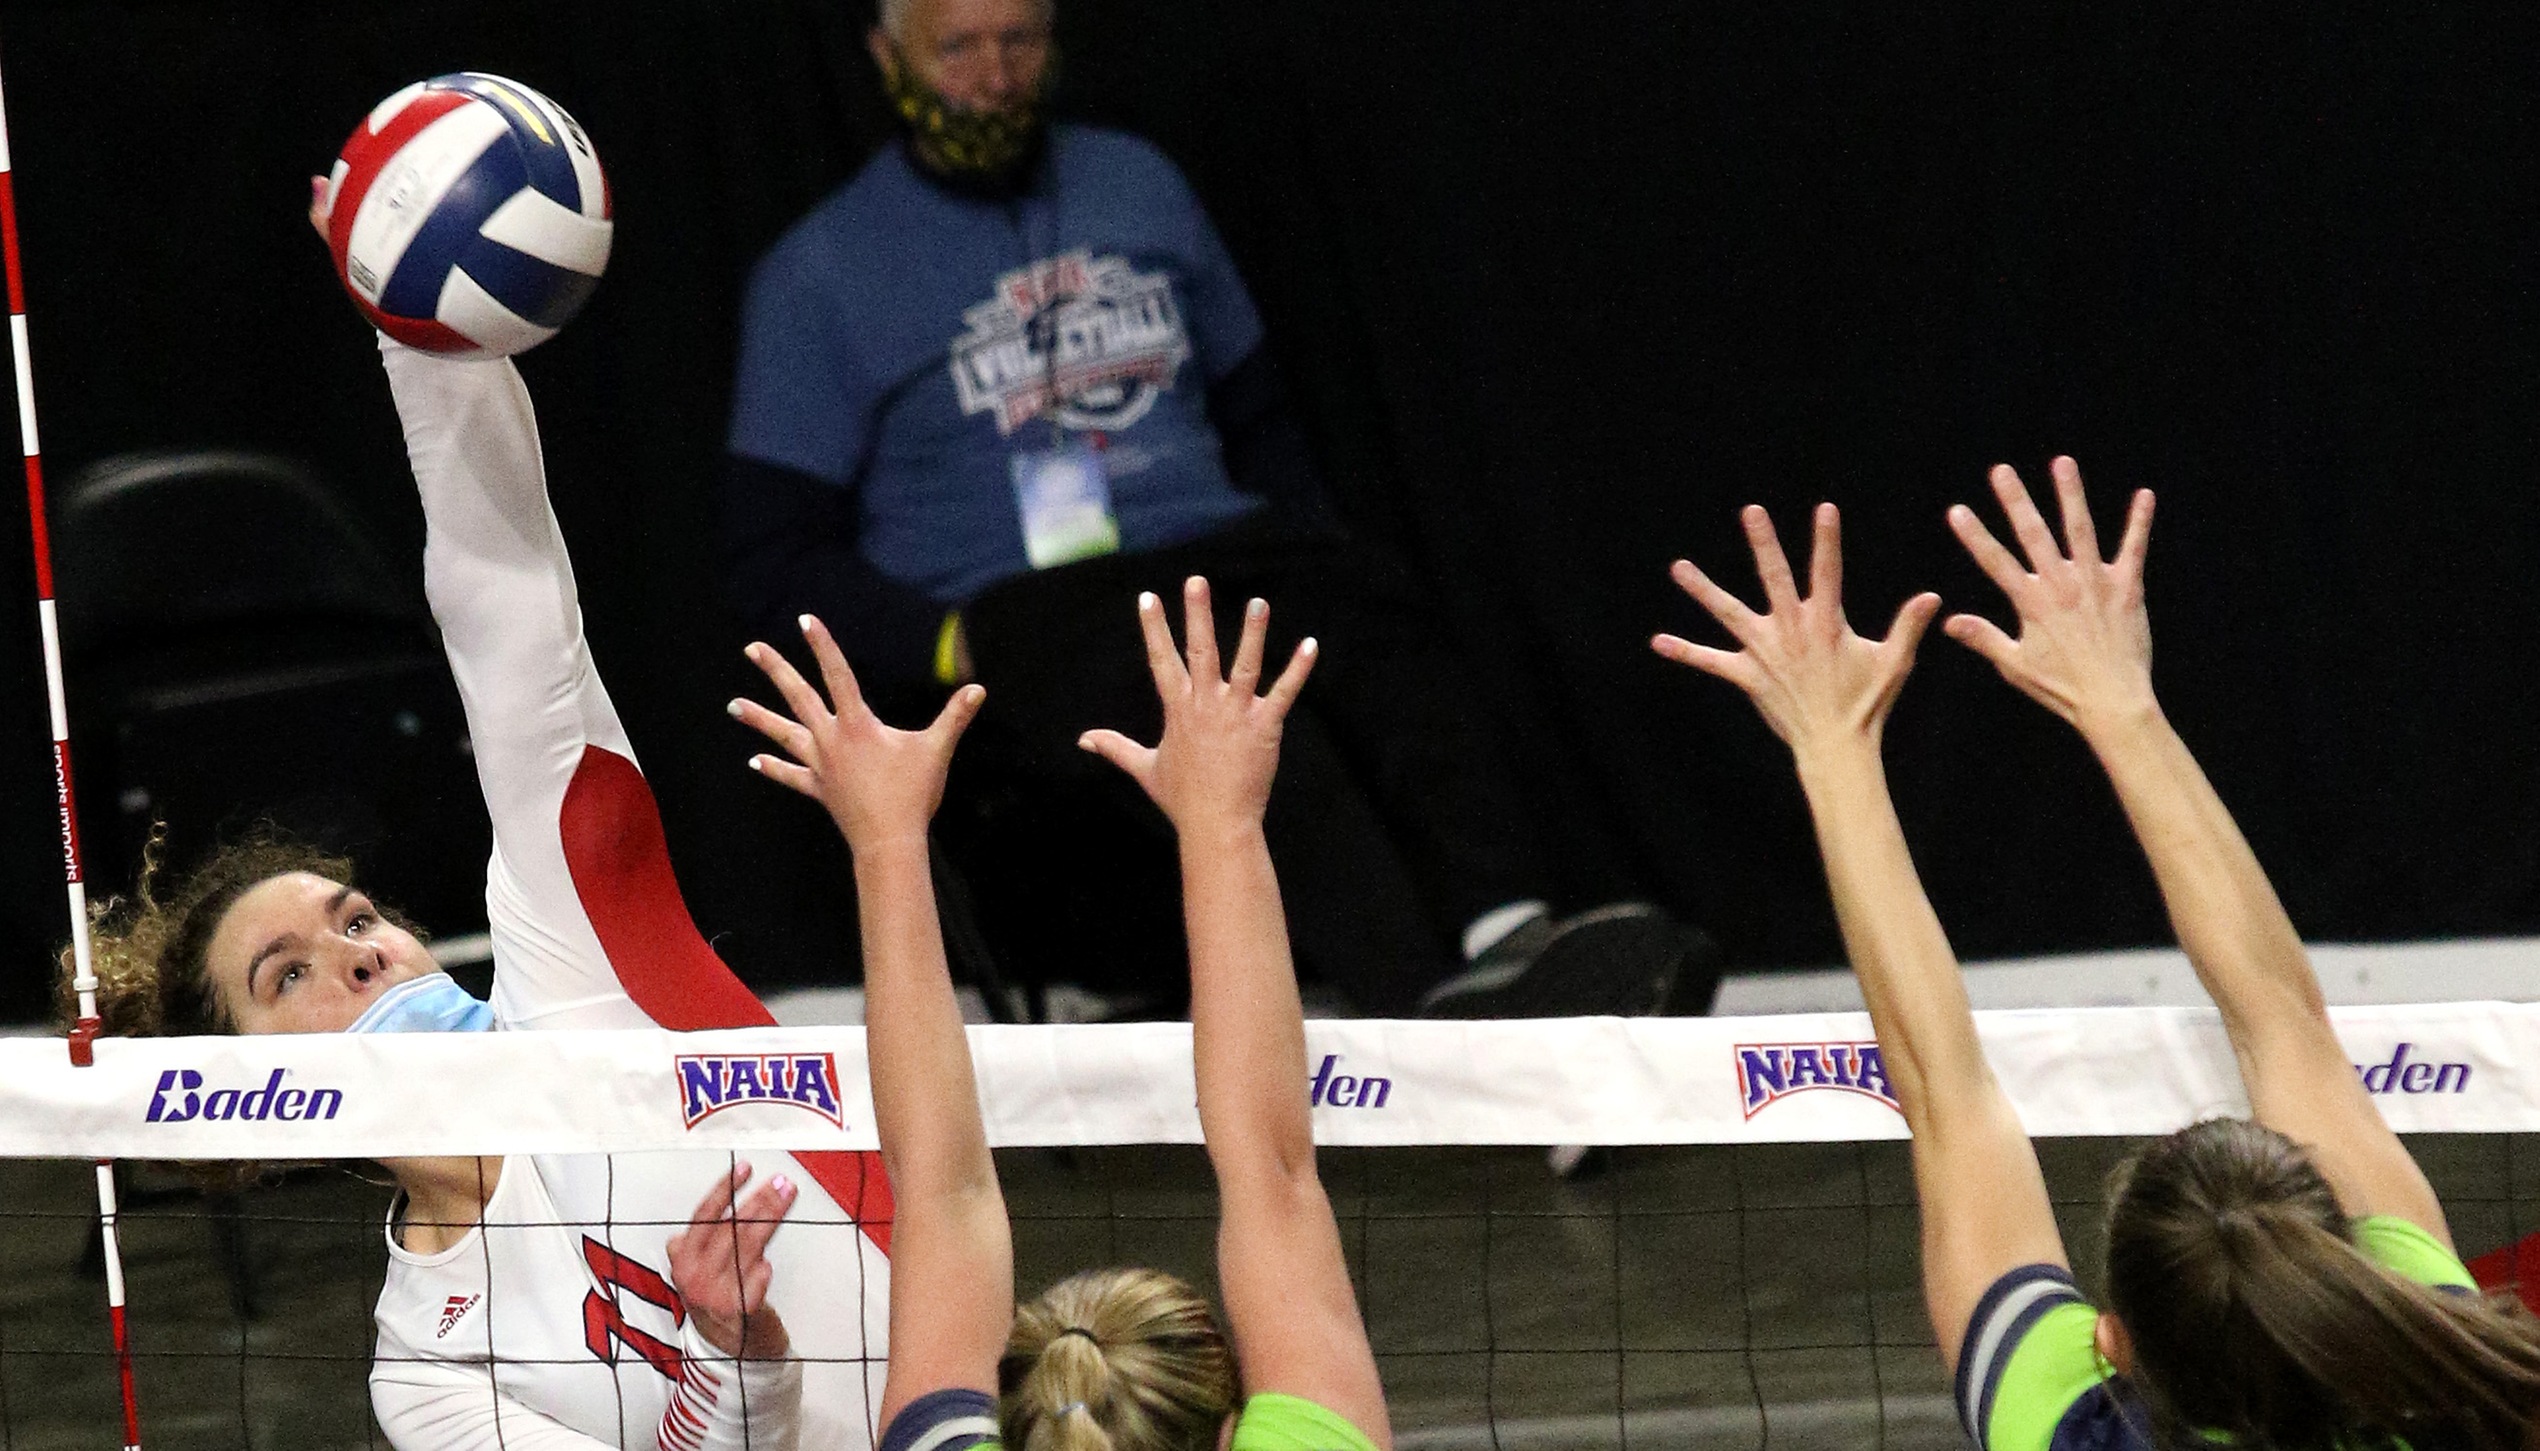 No. 2 Viterbo volleyball wins first match of NAIA tourney, improves to 39-1 heading into Wed.